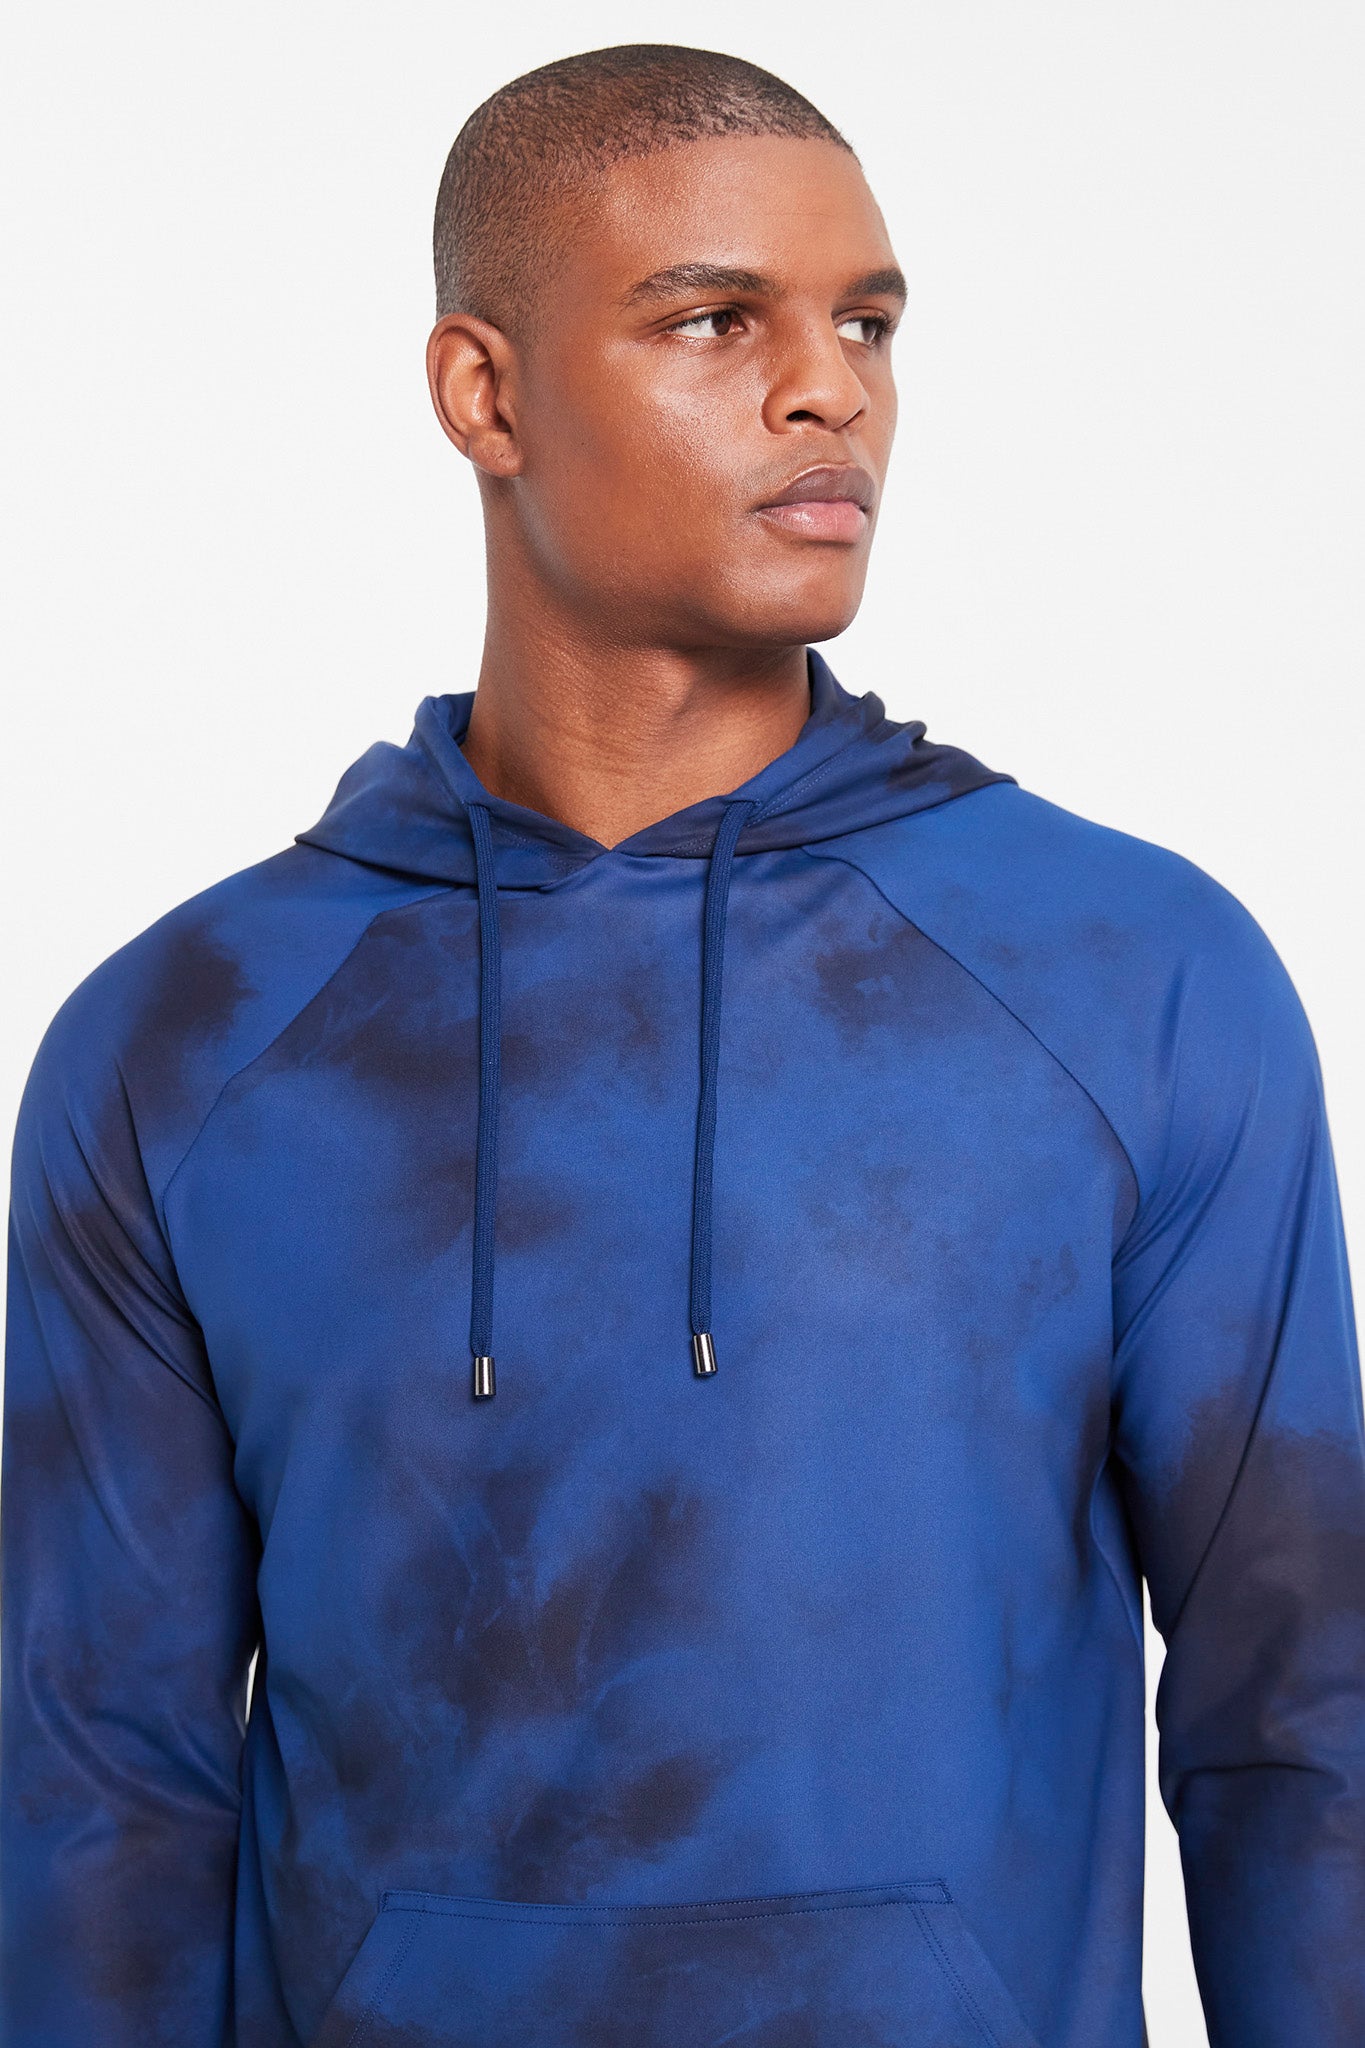 Image of the hicks hoodie in classic blue